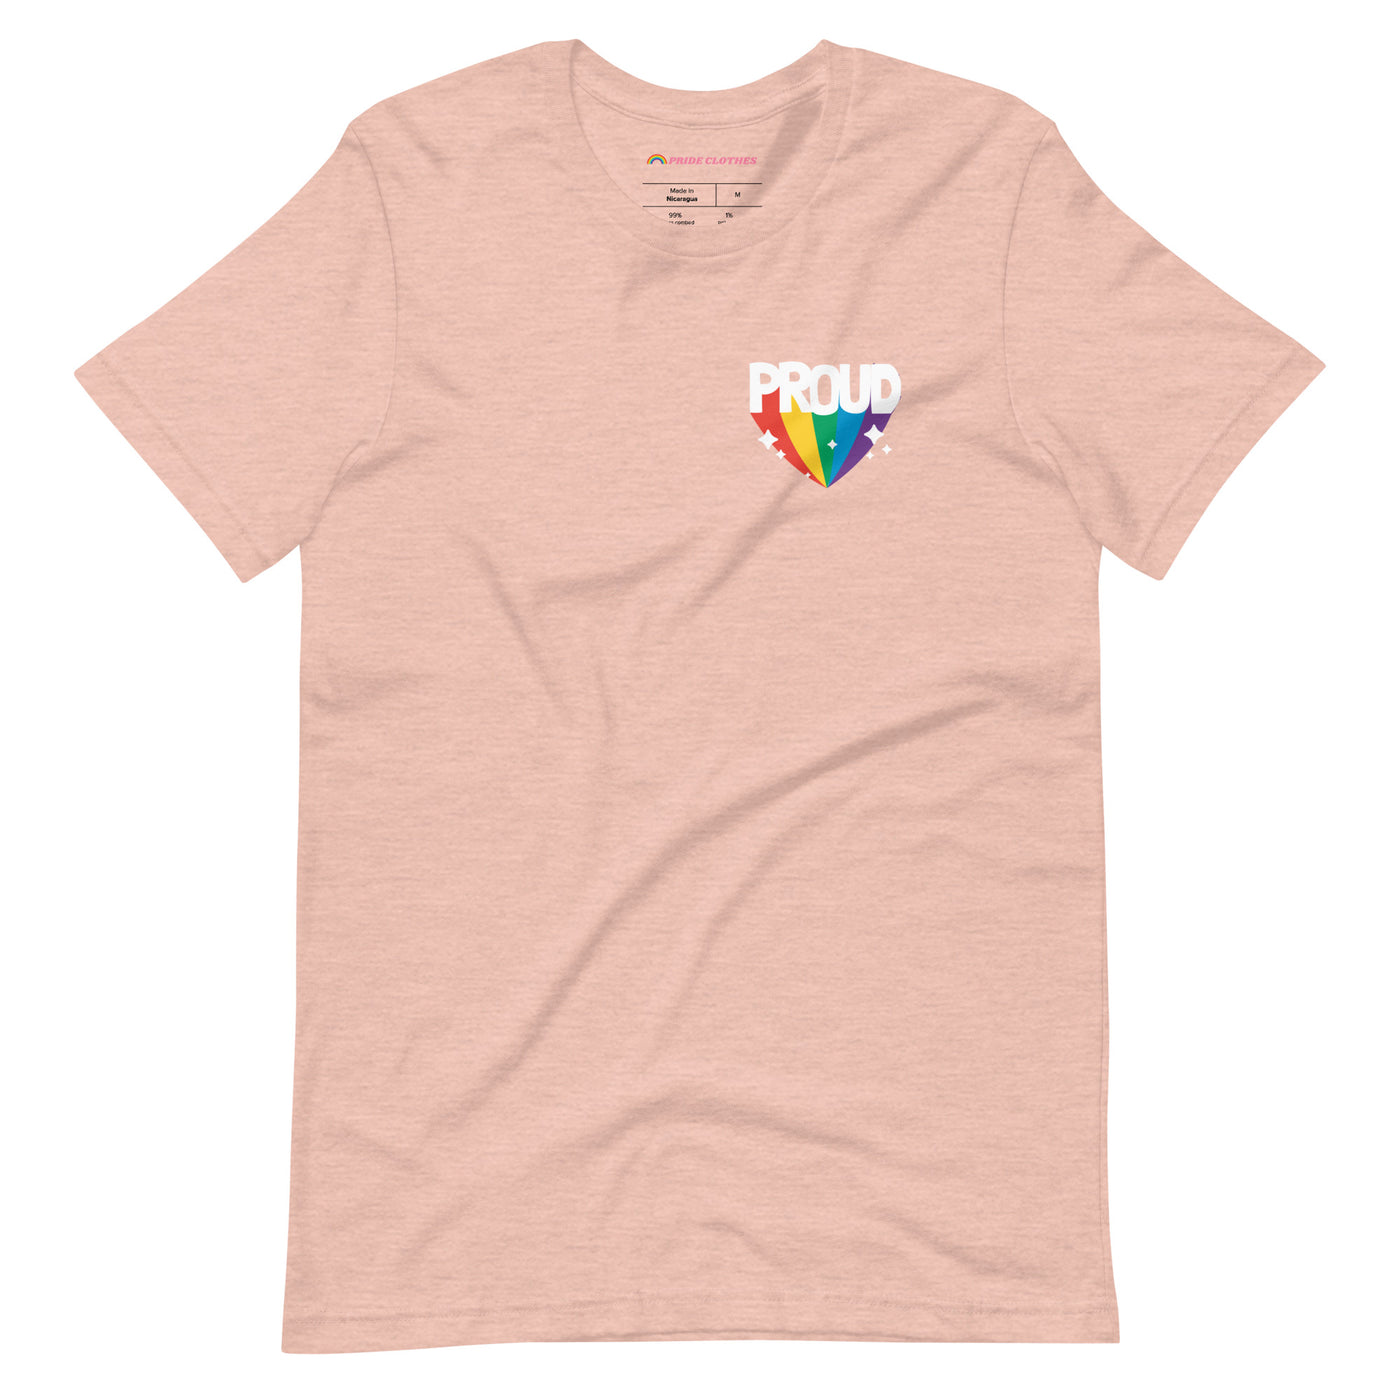 Pride Clothes - Proud of My True Rainbow Colors Gay Pride T-Shirt - Heather Prism Peach